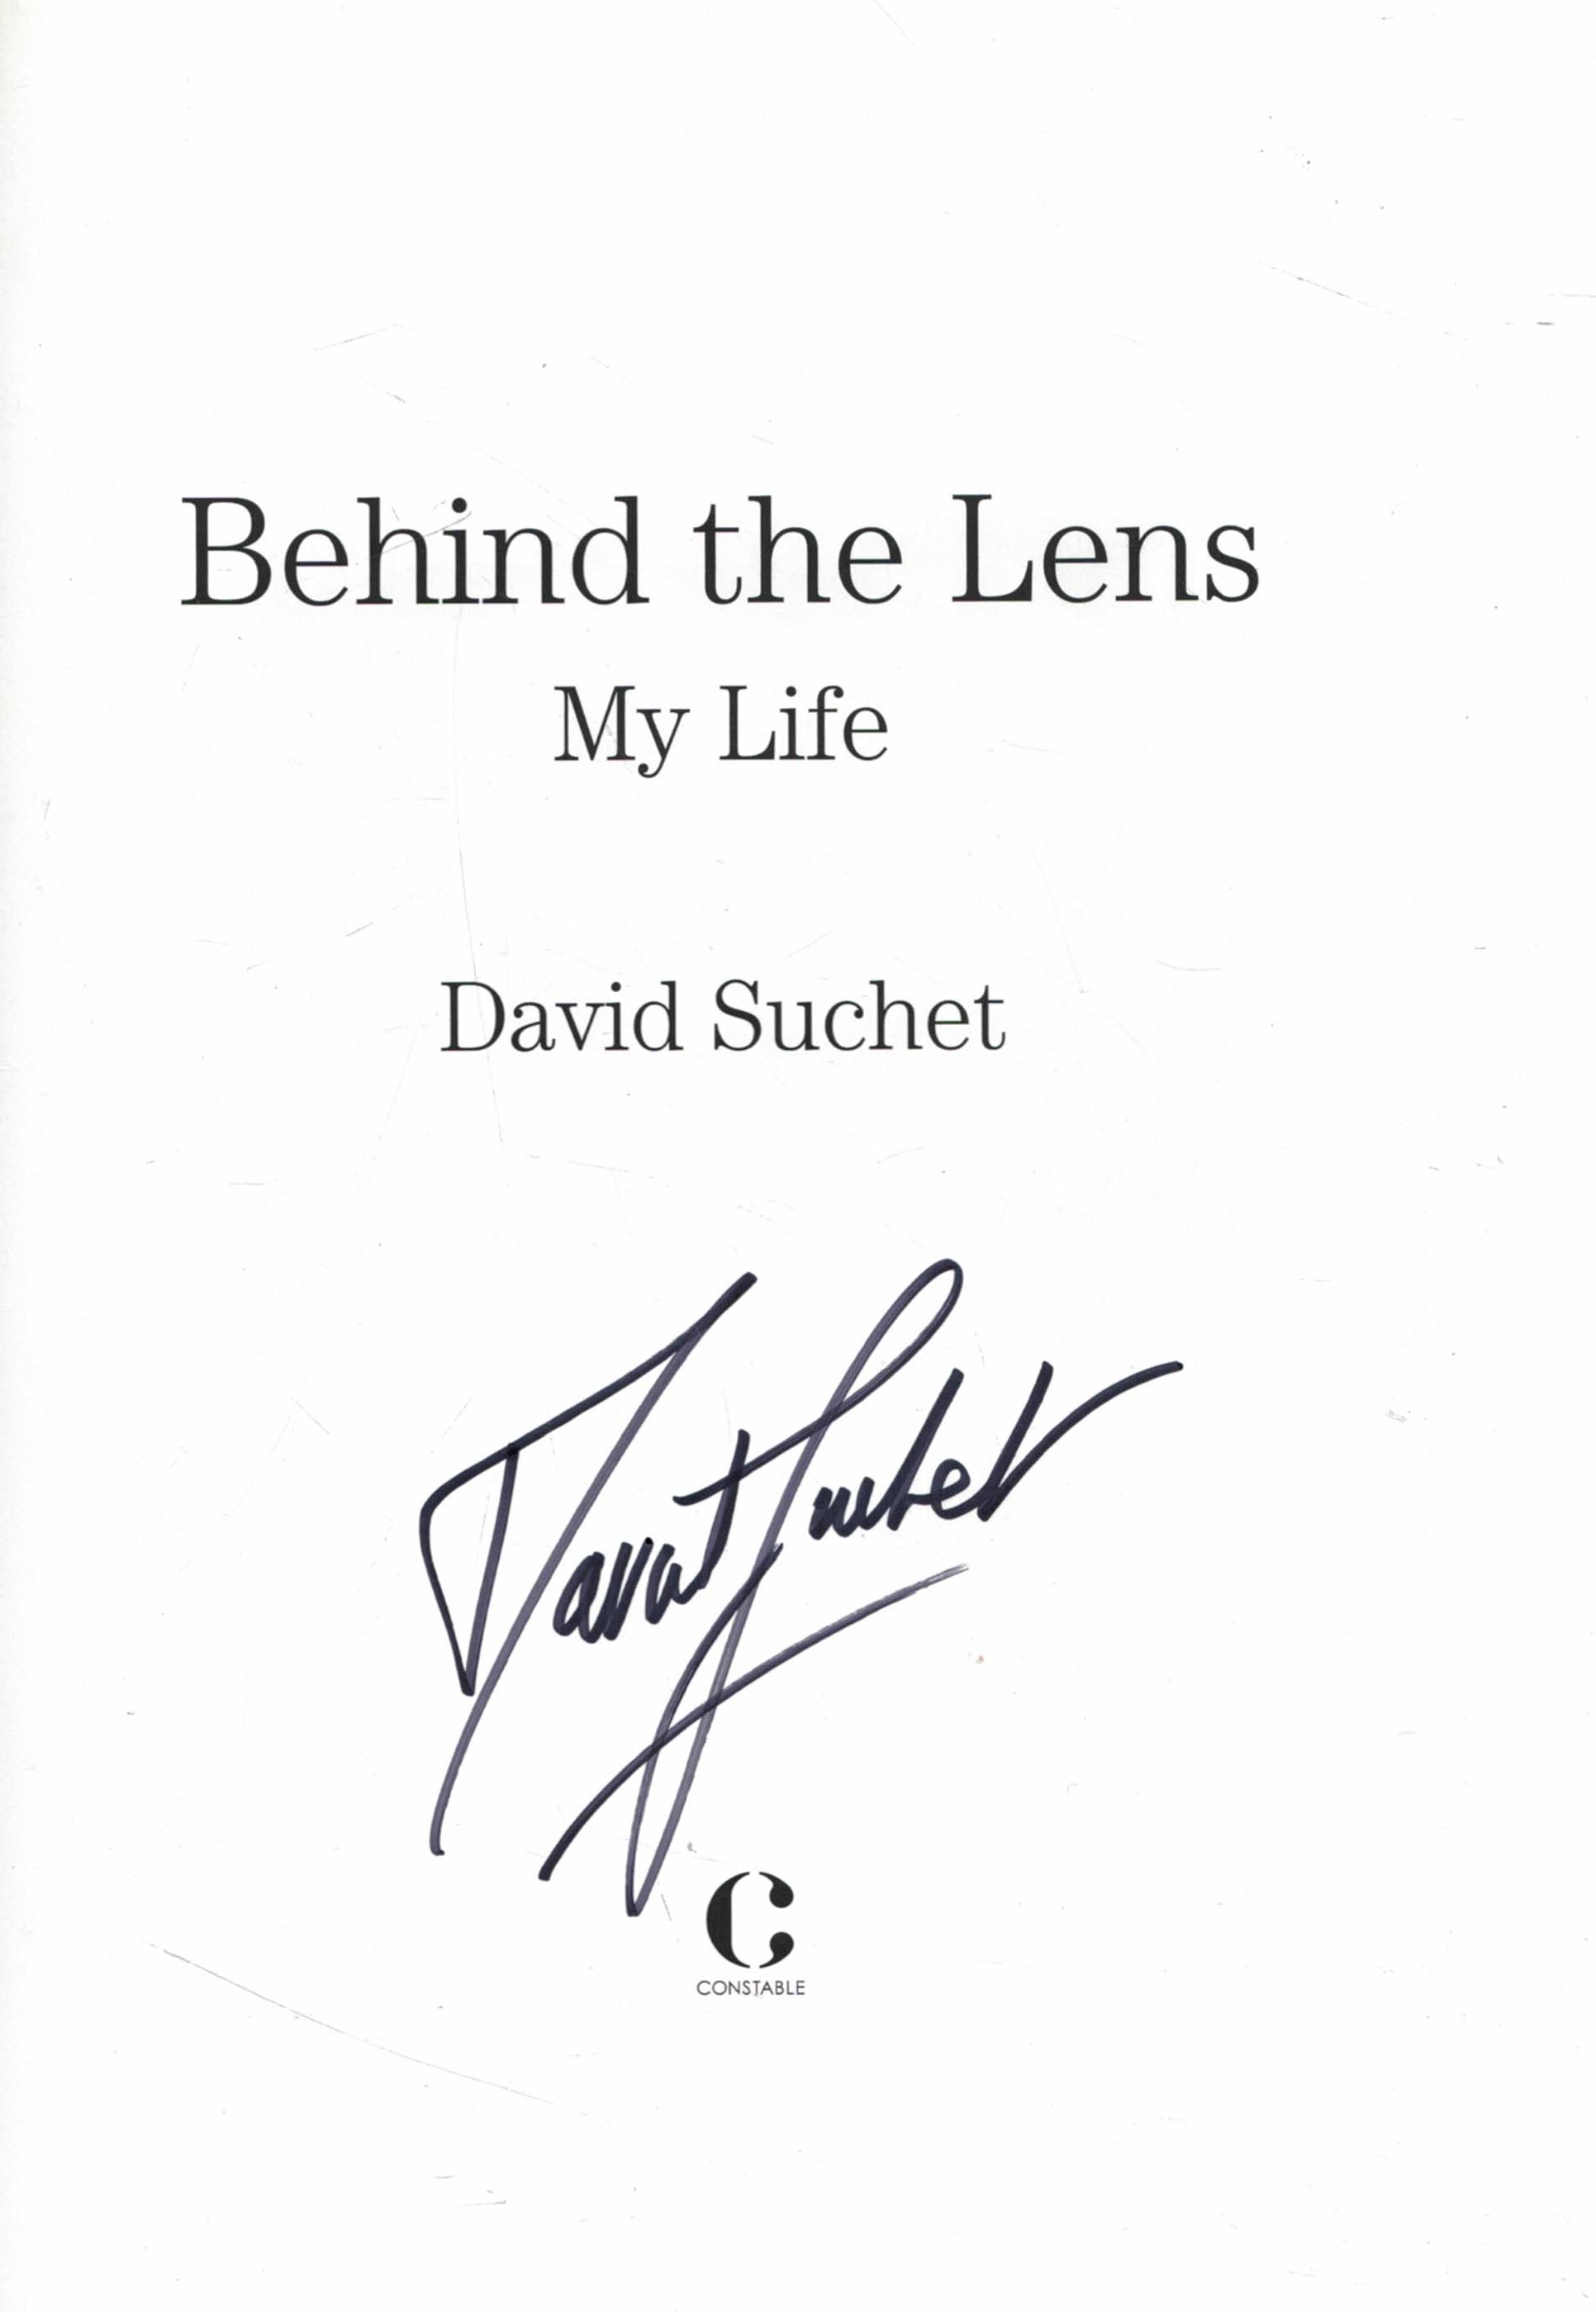 Behind the Lens. Signed copy